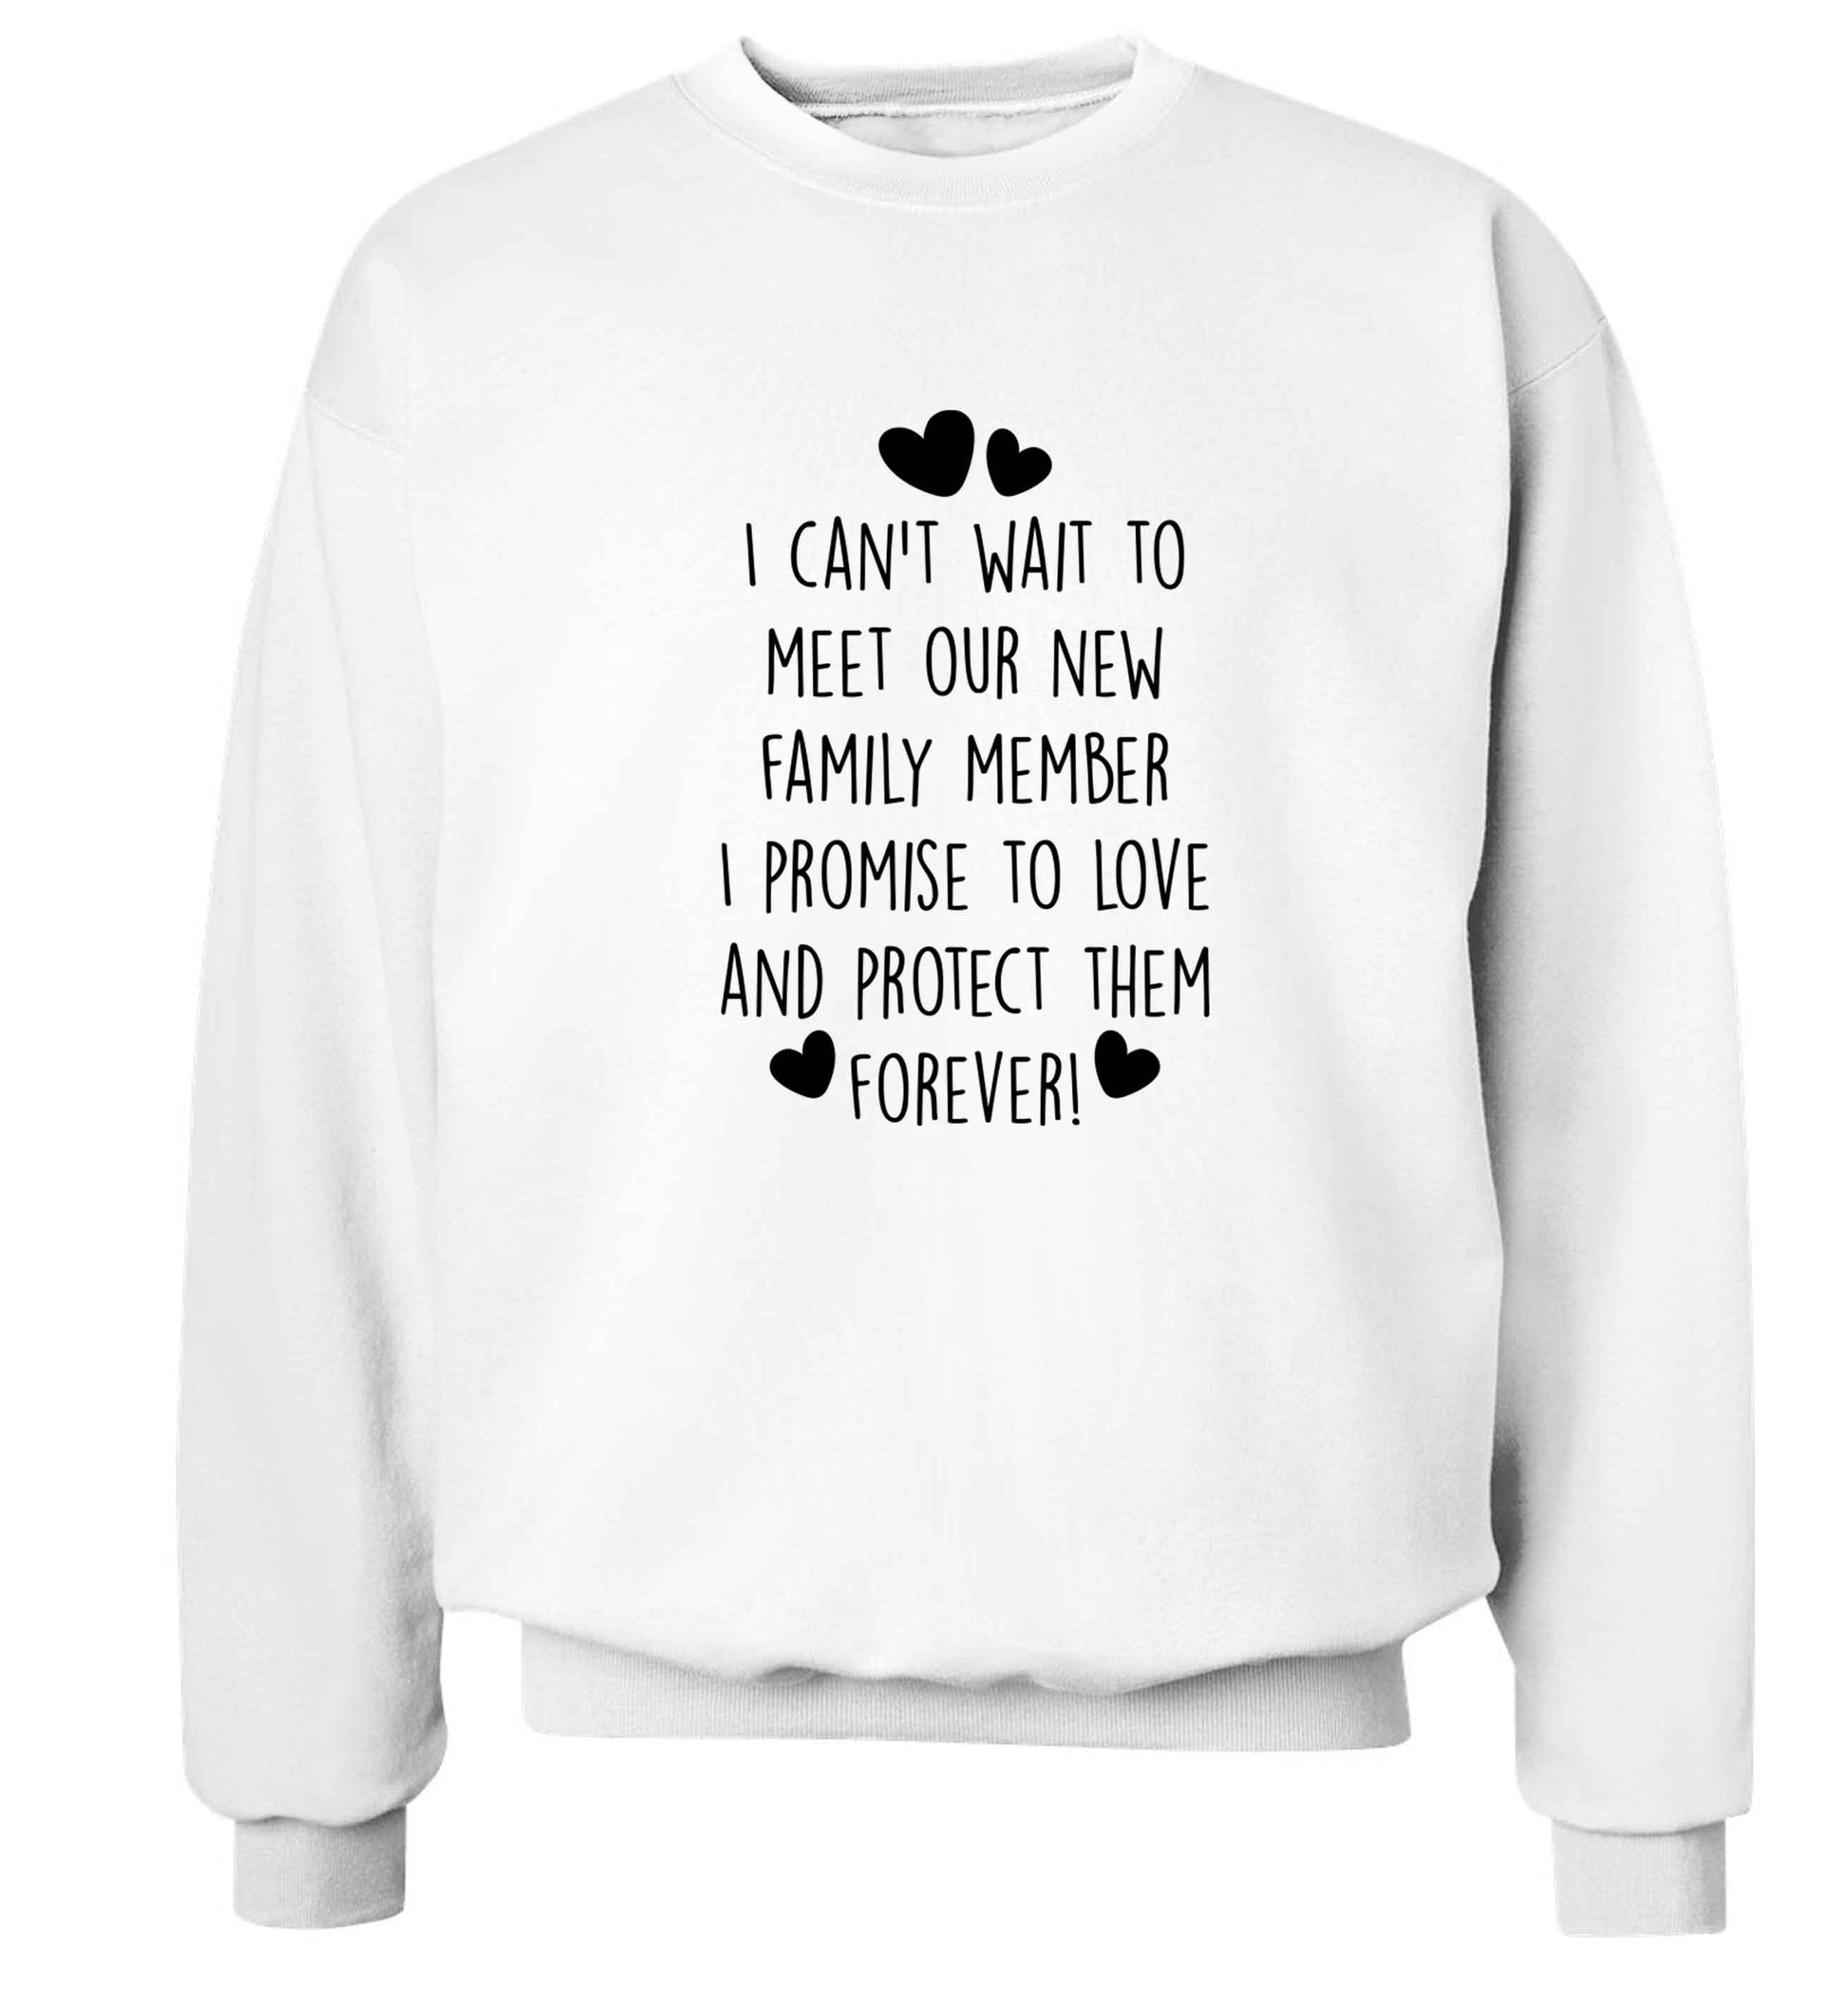 I can't wait to meet our new family member I promise to love and protect them foreverAdult's unisex white Sweater 2XL